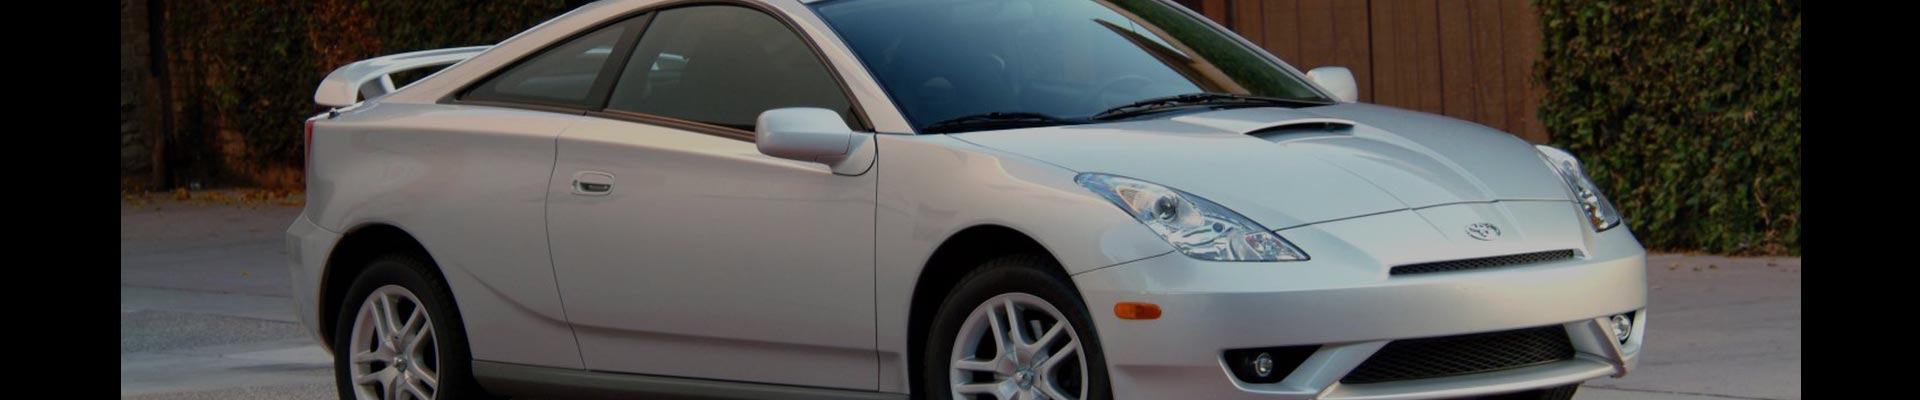 Shop Replacement and OEM 1997 Toyota Celica Parts with Discounted Price on the Net